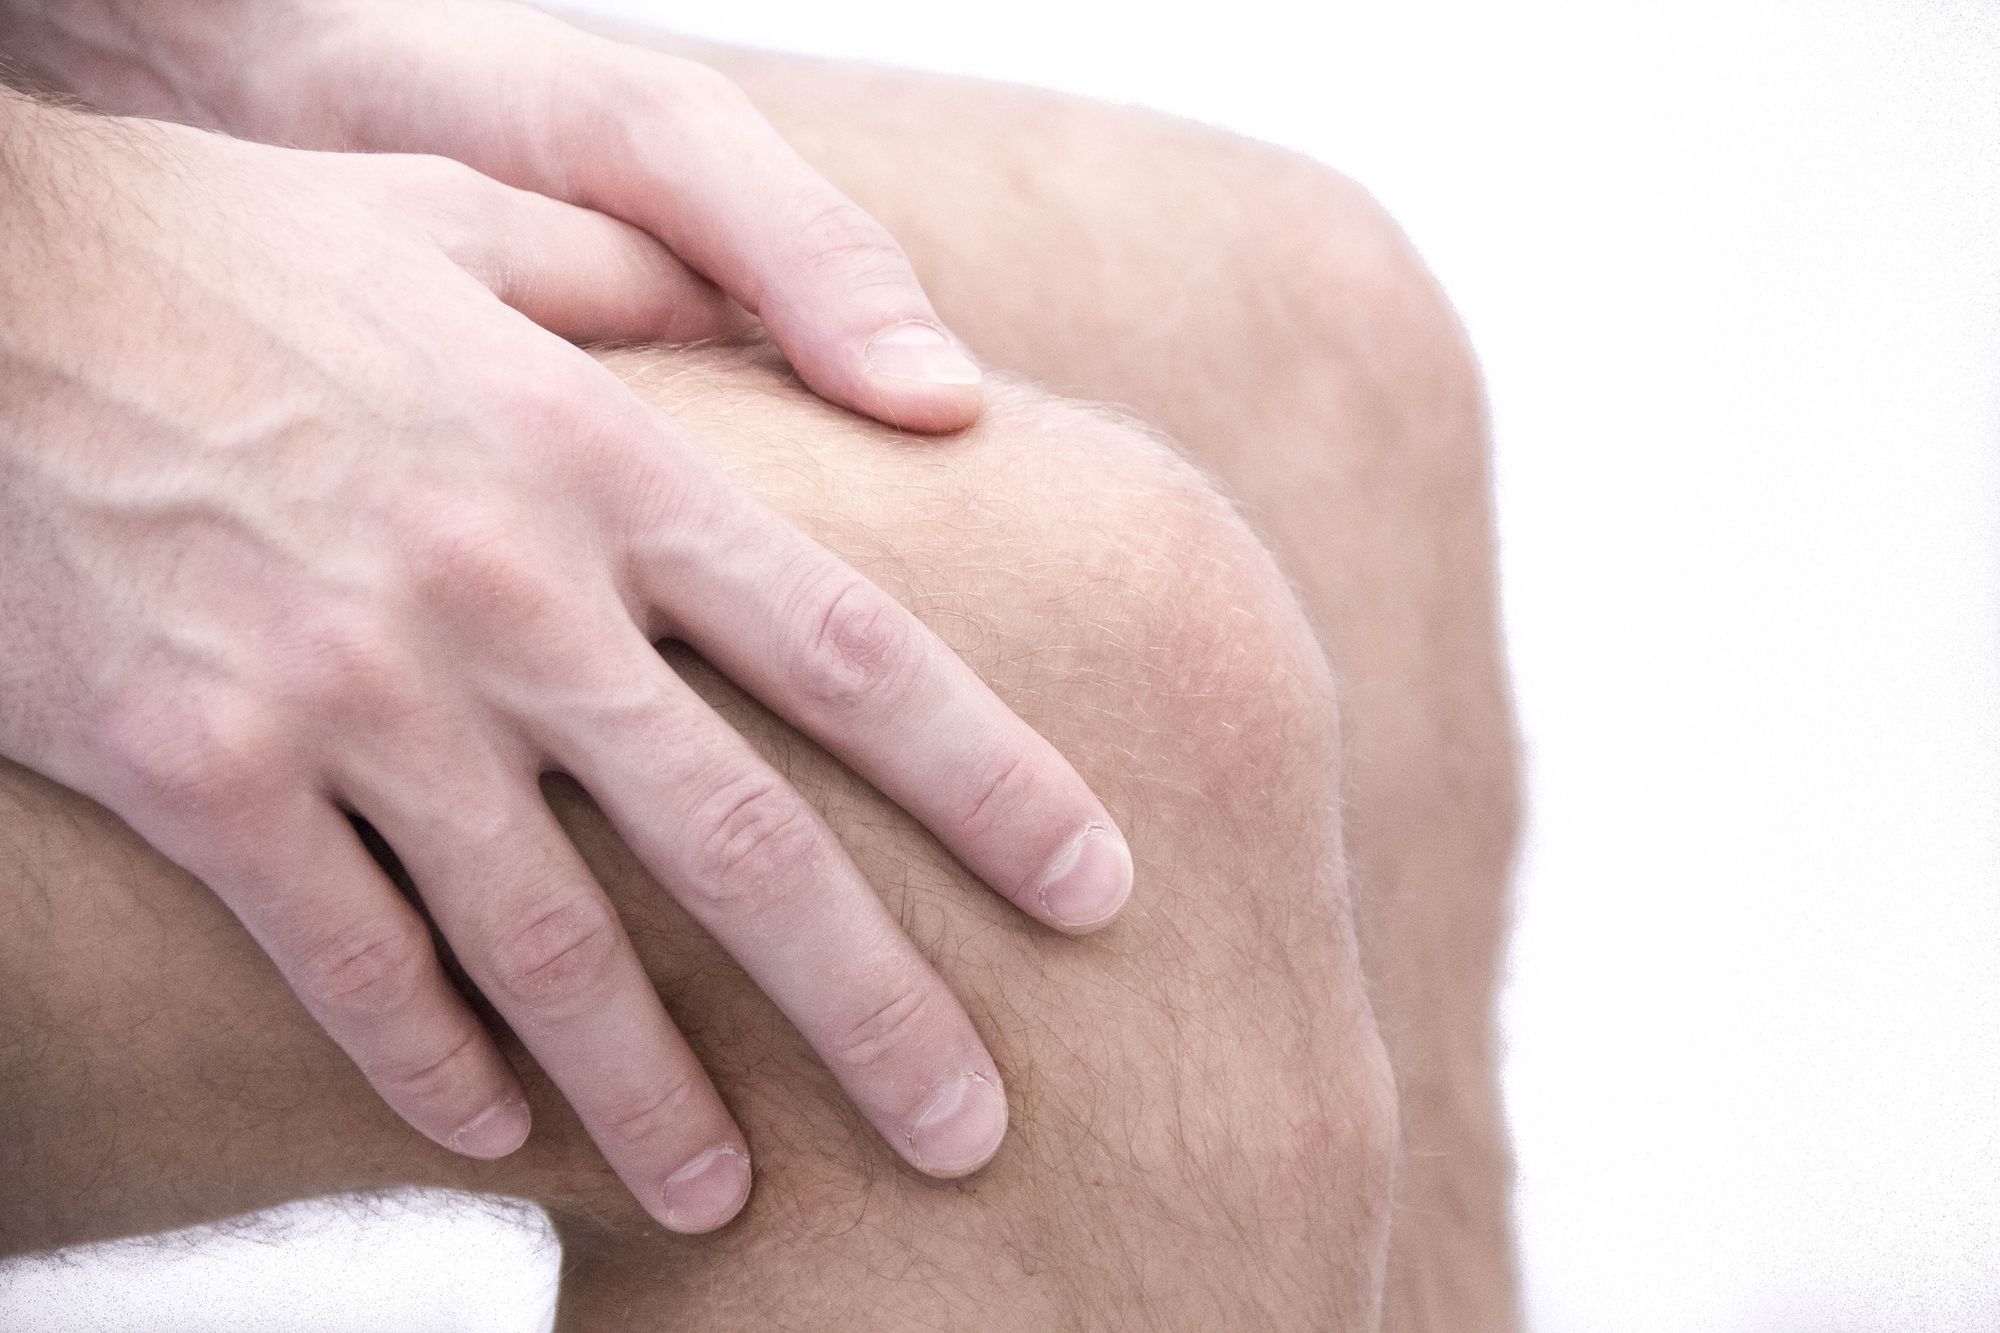                      Managing osteoarthritis for hips and knees                             
                     